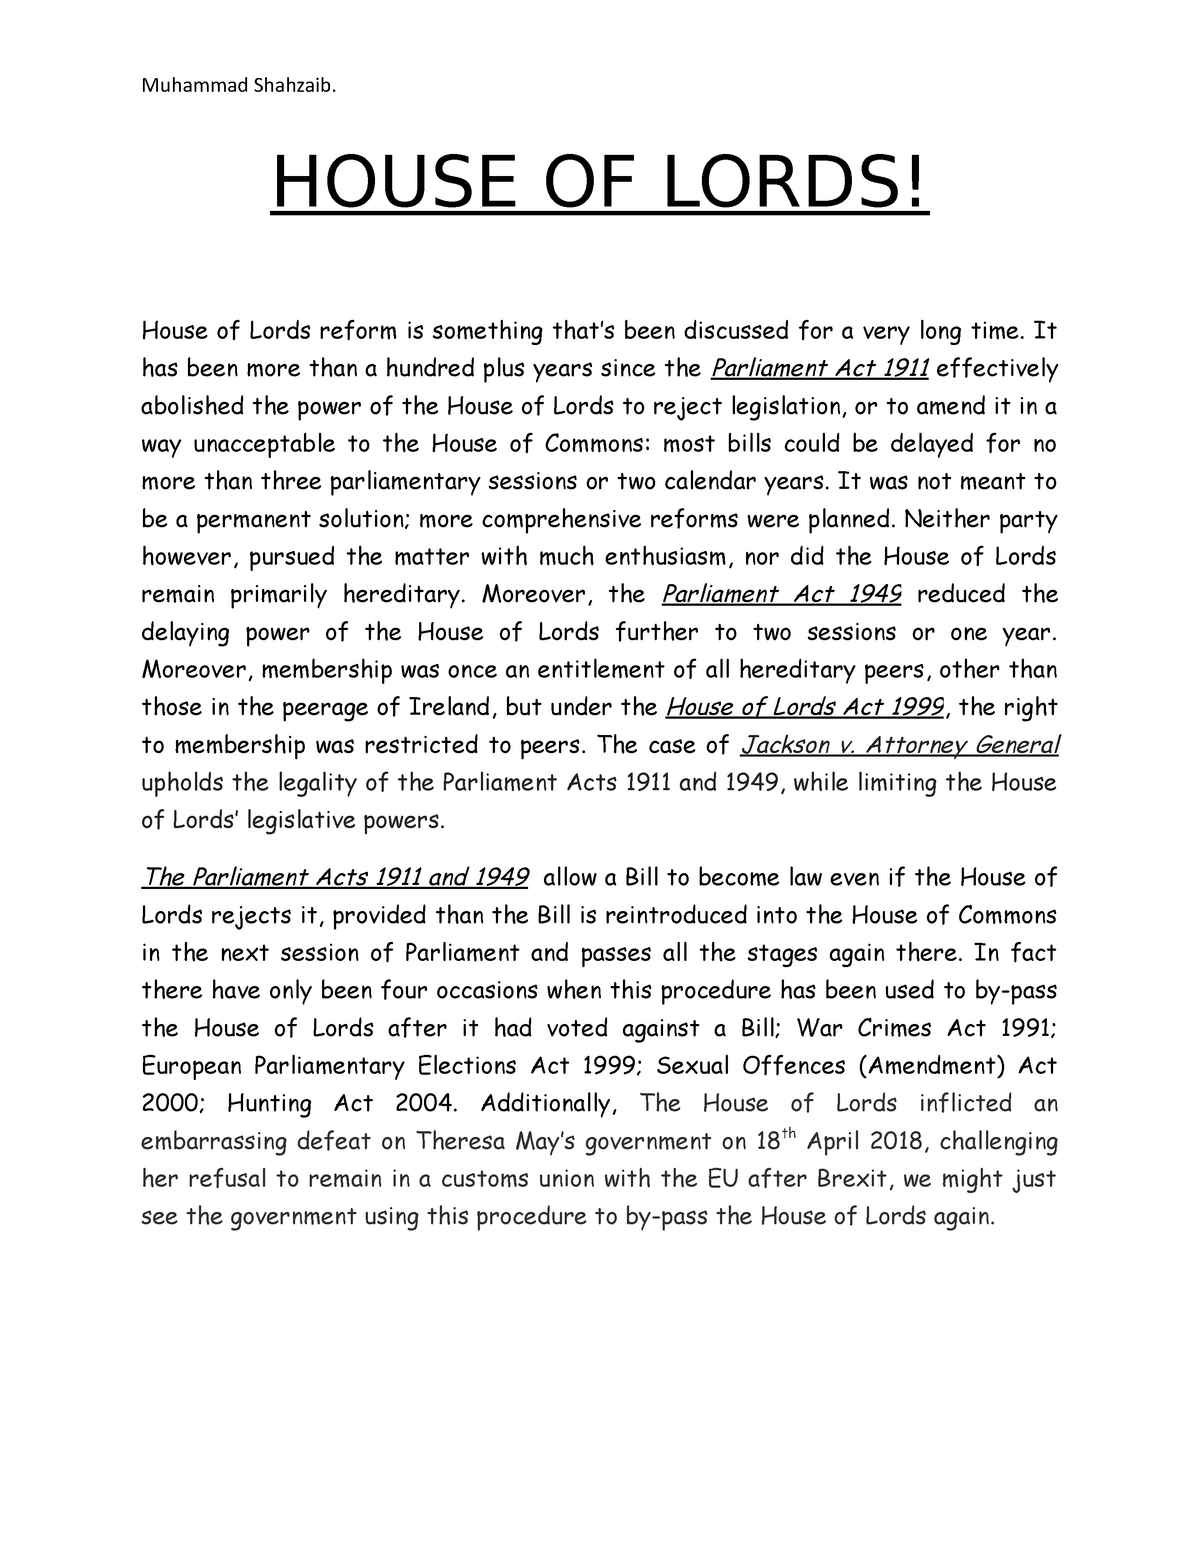 house of lords research paper